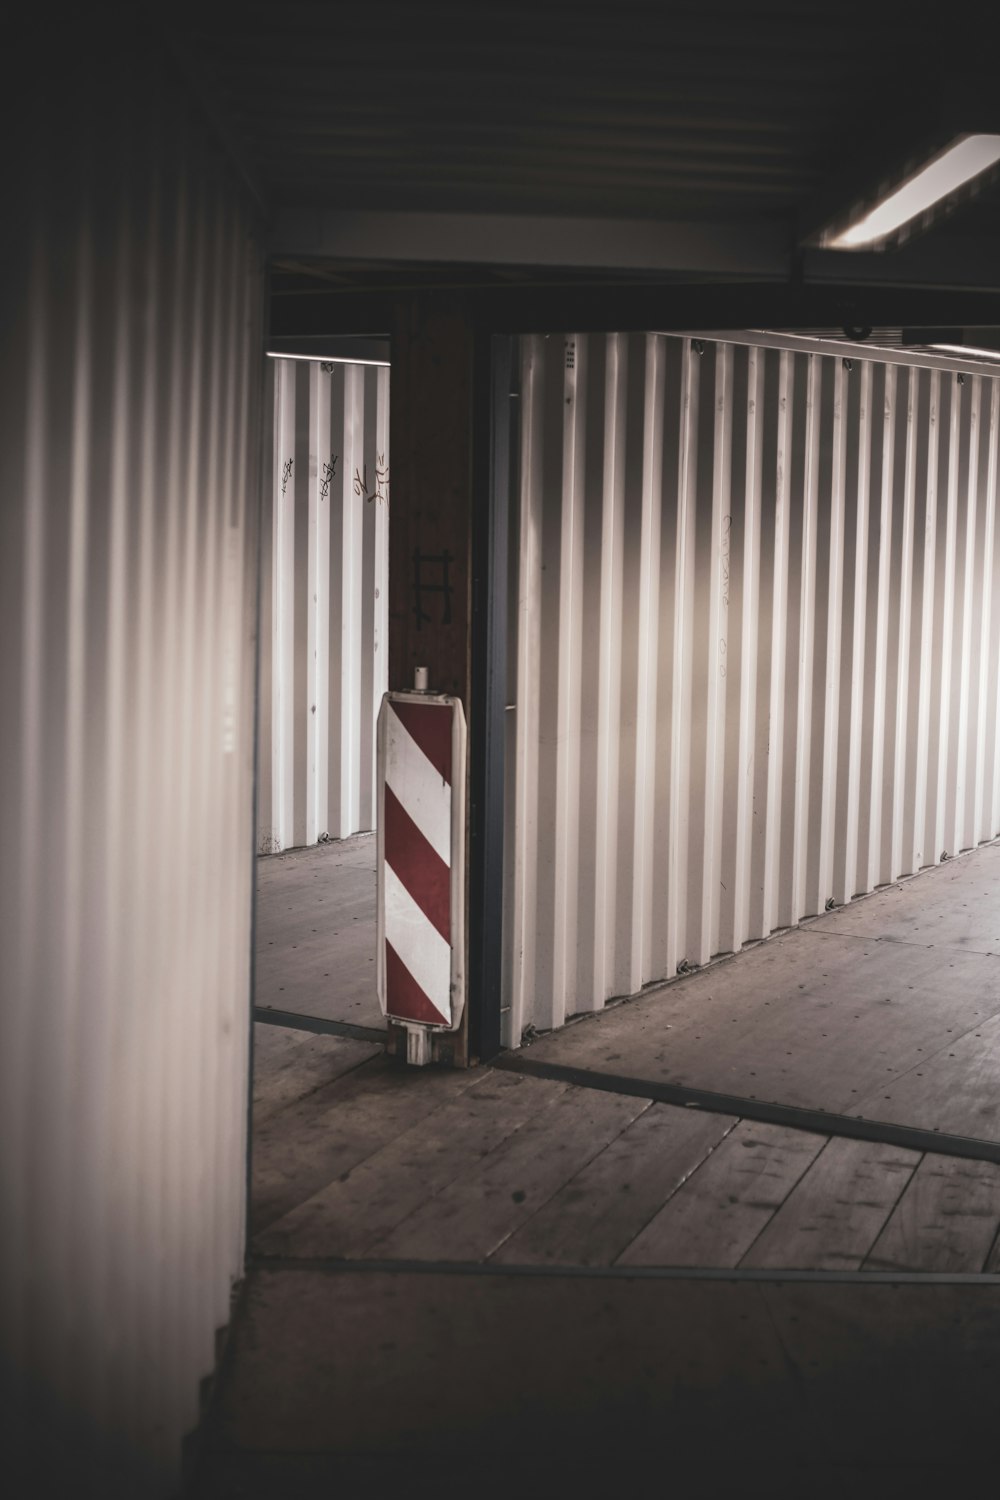 a red and white striped barricade in a building